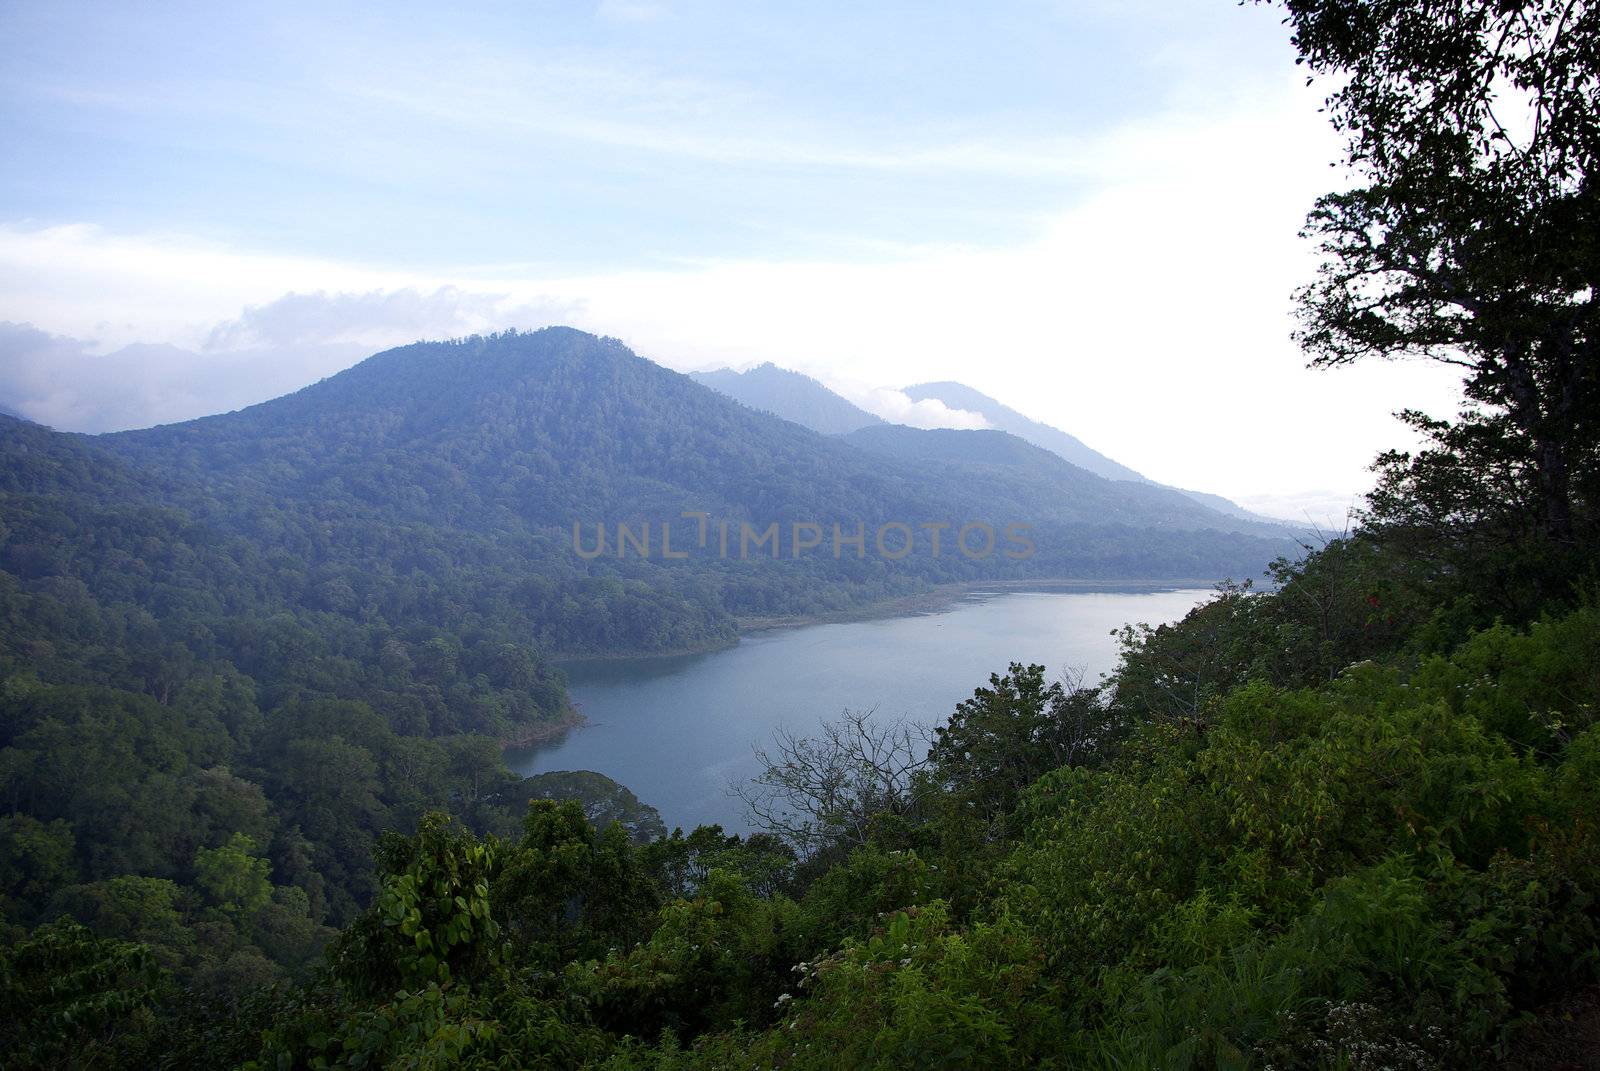 It's a view on one of four big lakes of Bali island, with lots of tropical forest